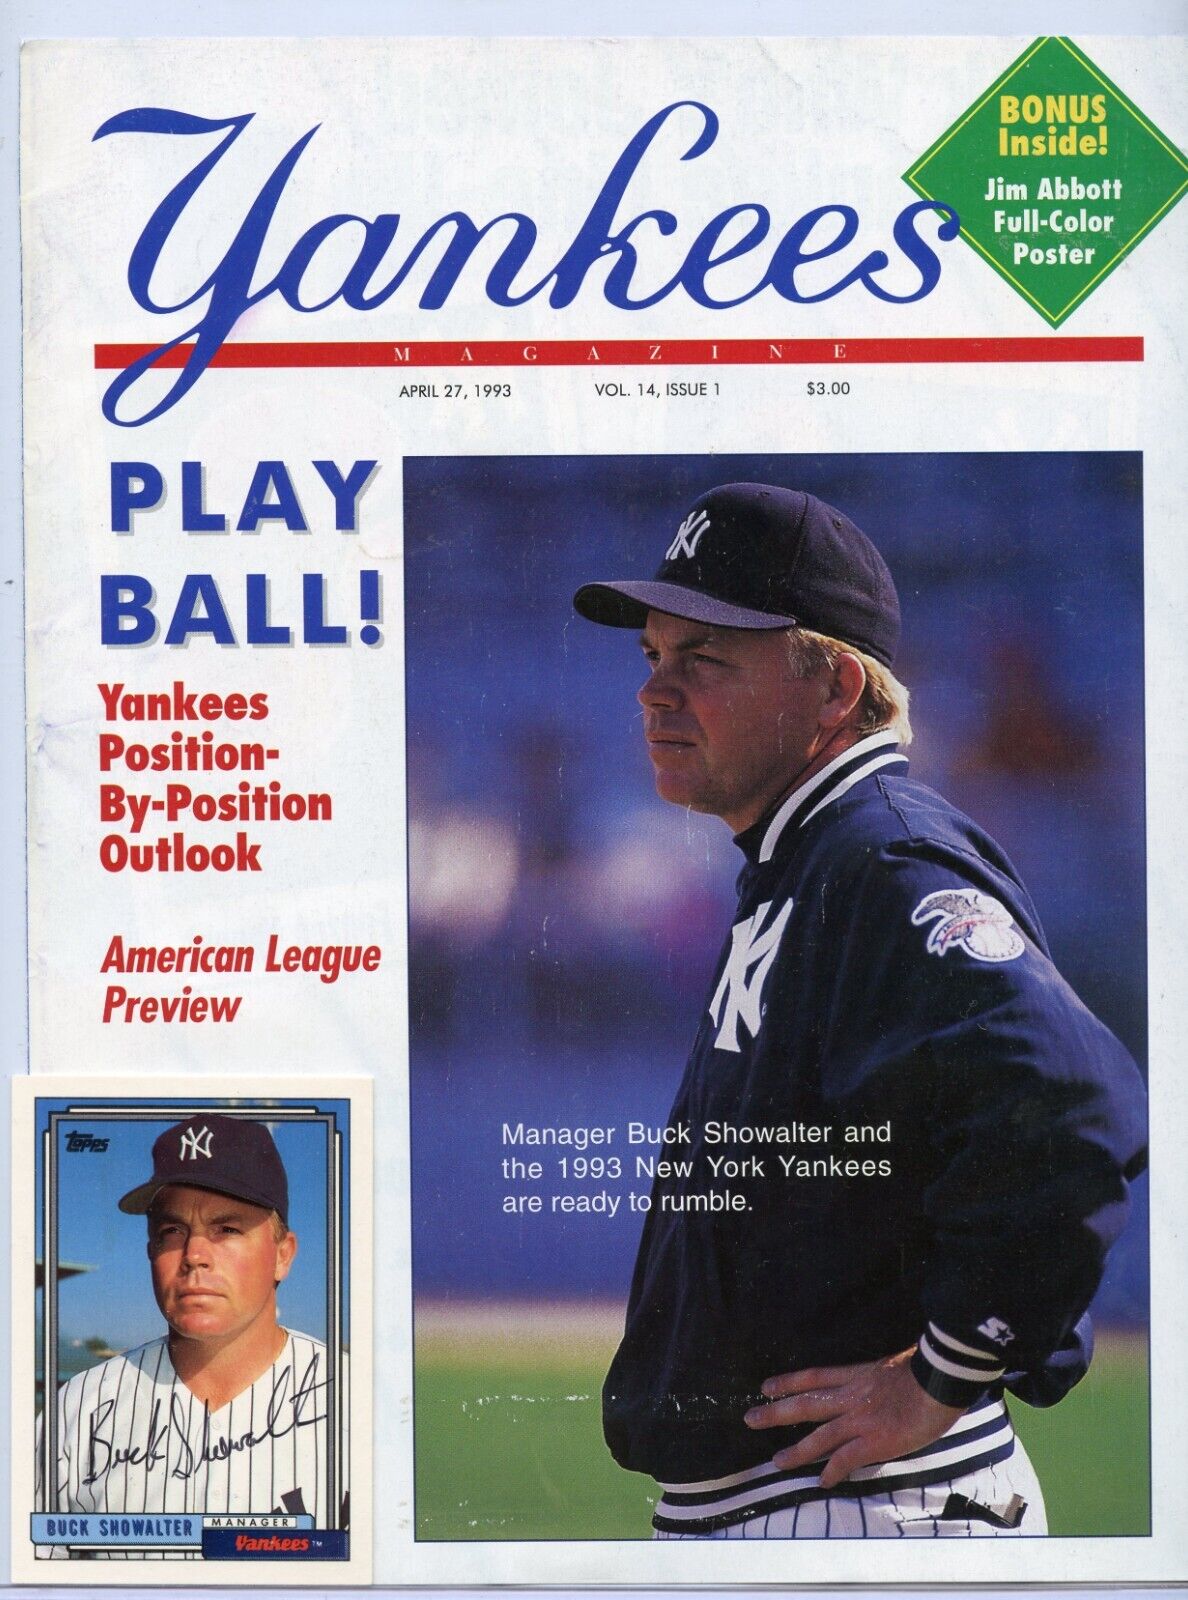 YANKEES BUCK SHOWALTER SIGNED CARD with MAGAZINE COVER